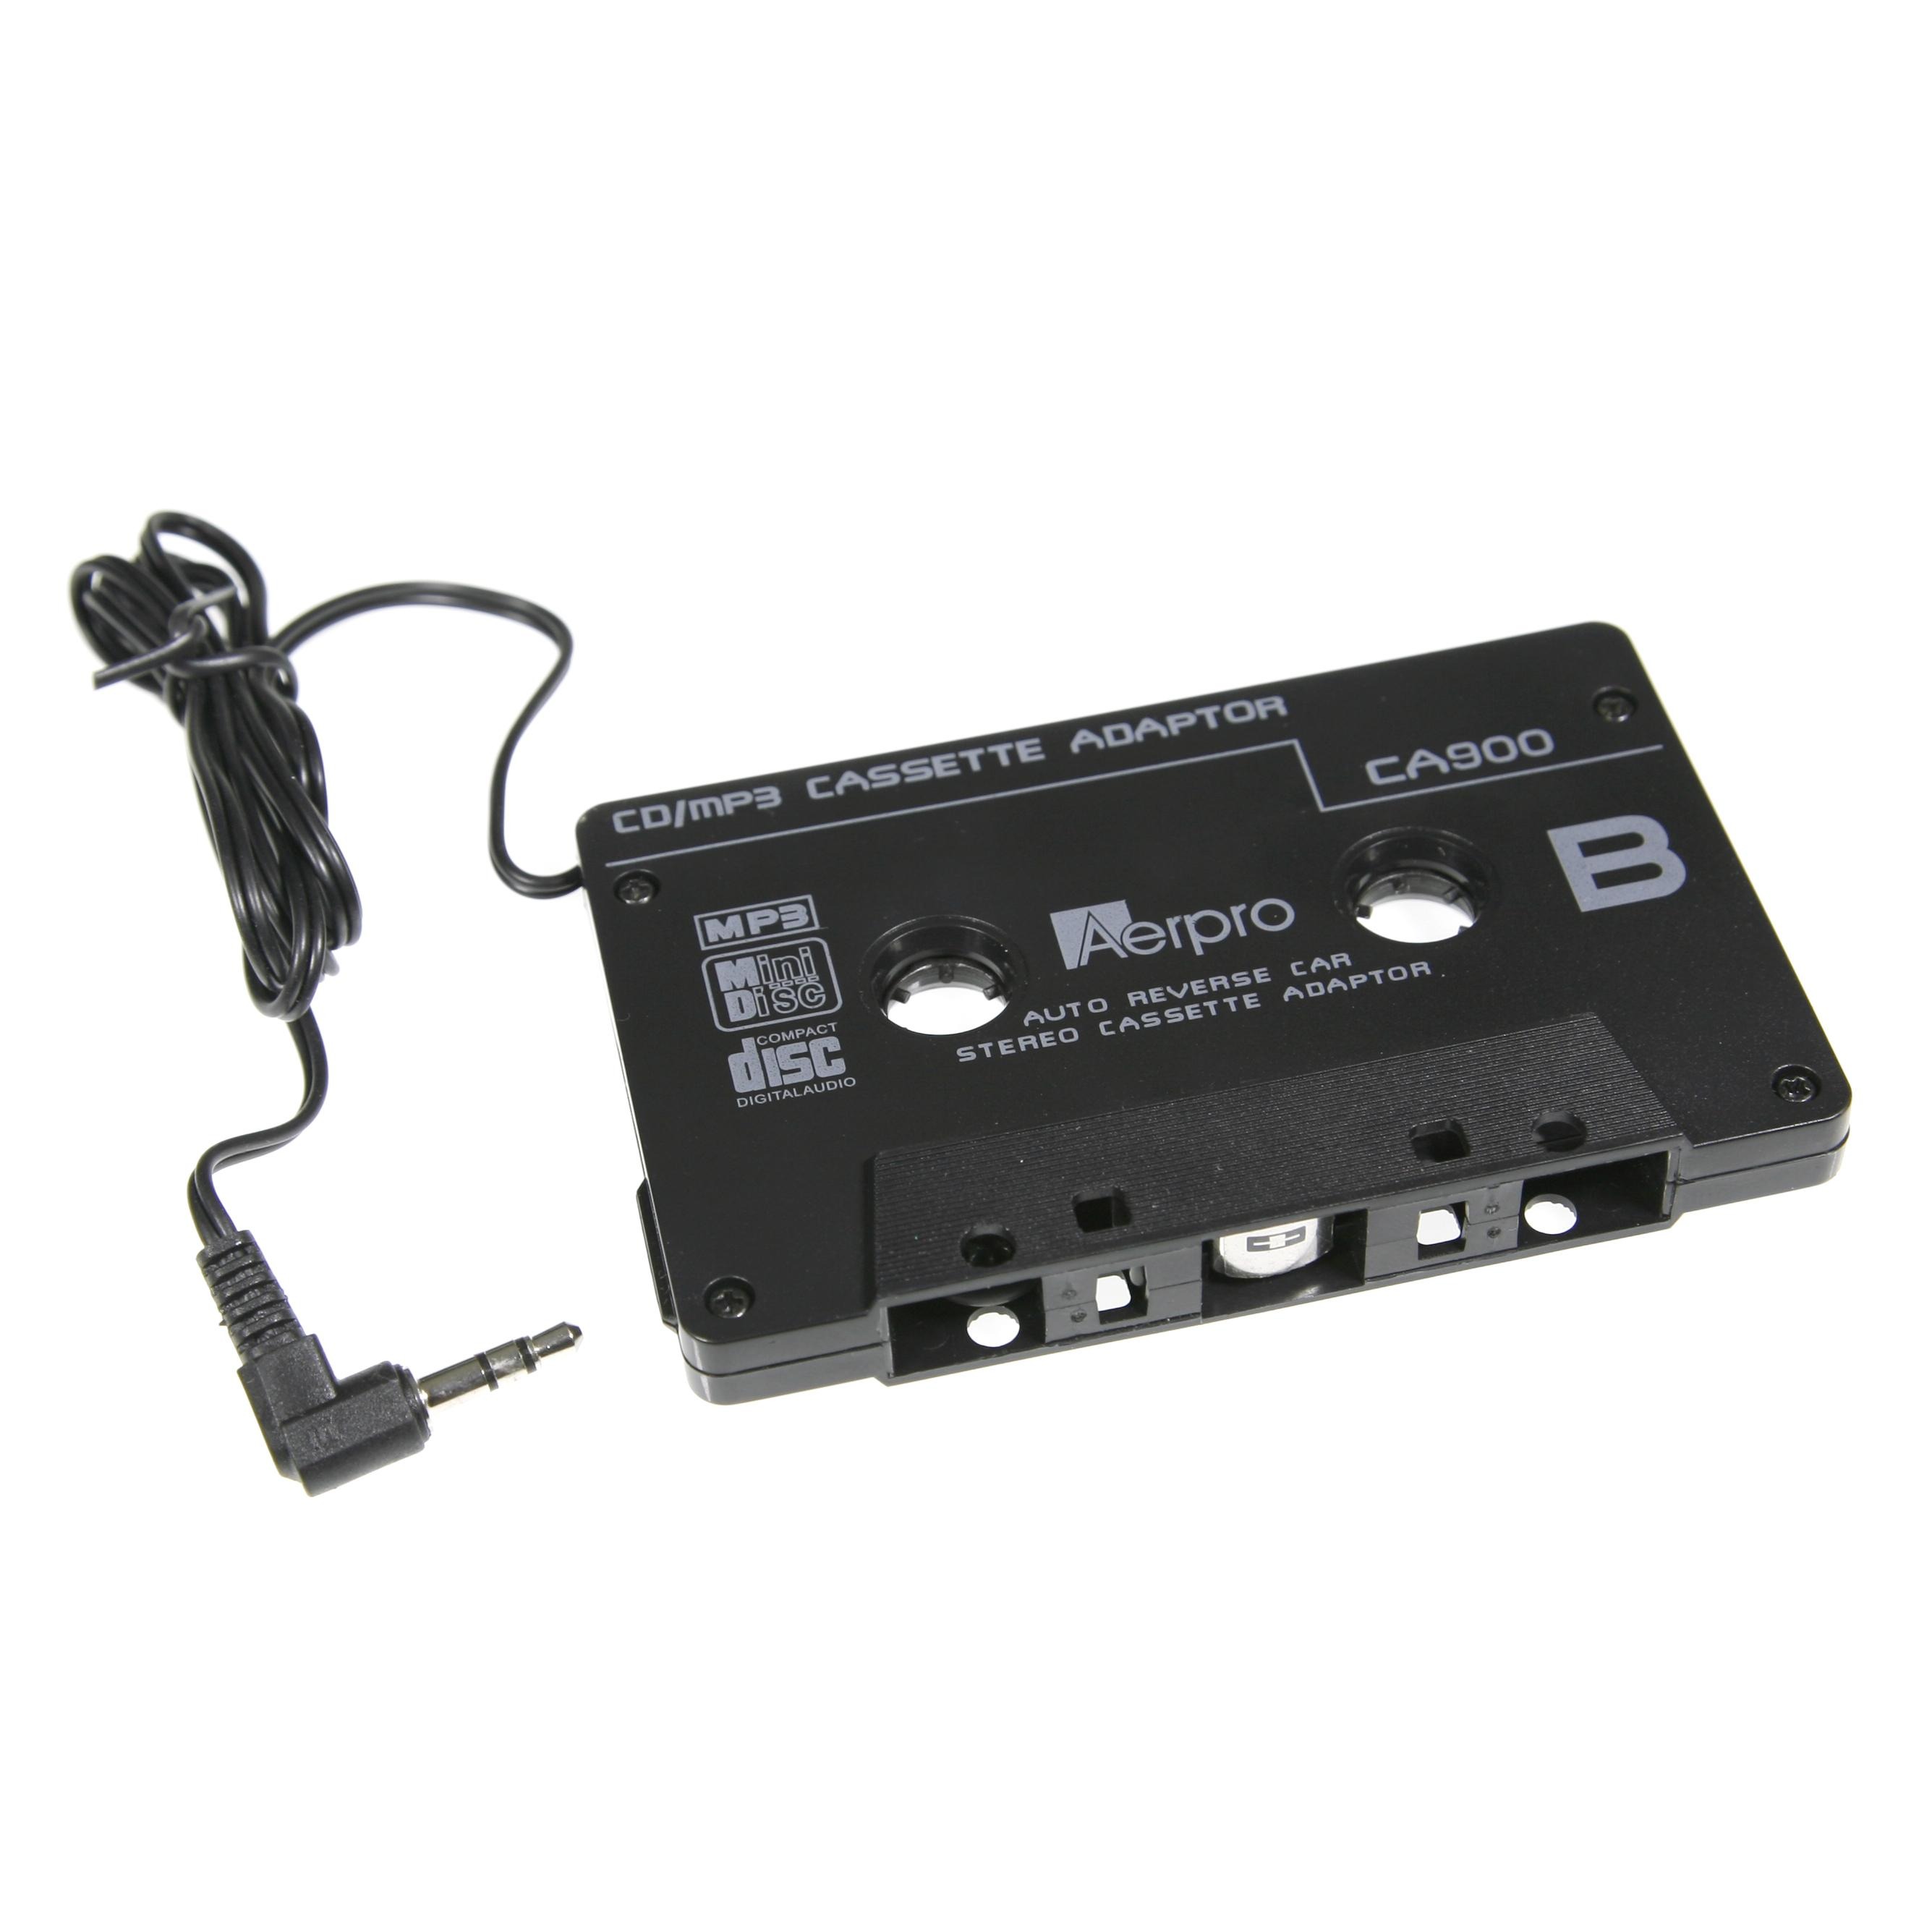 Aerpro Cassette to AUX Adapter